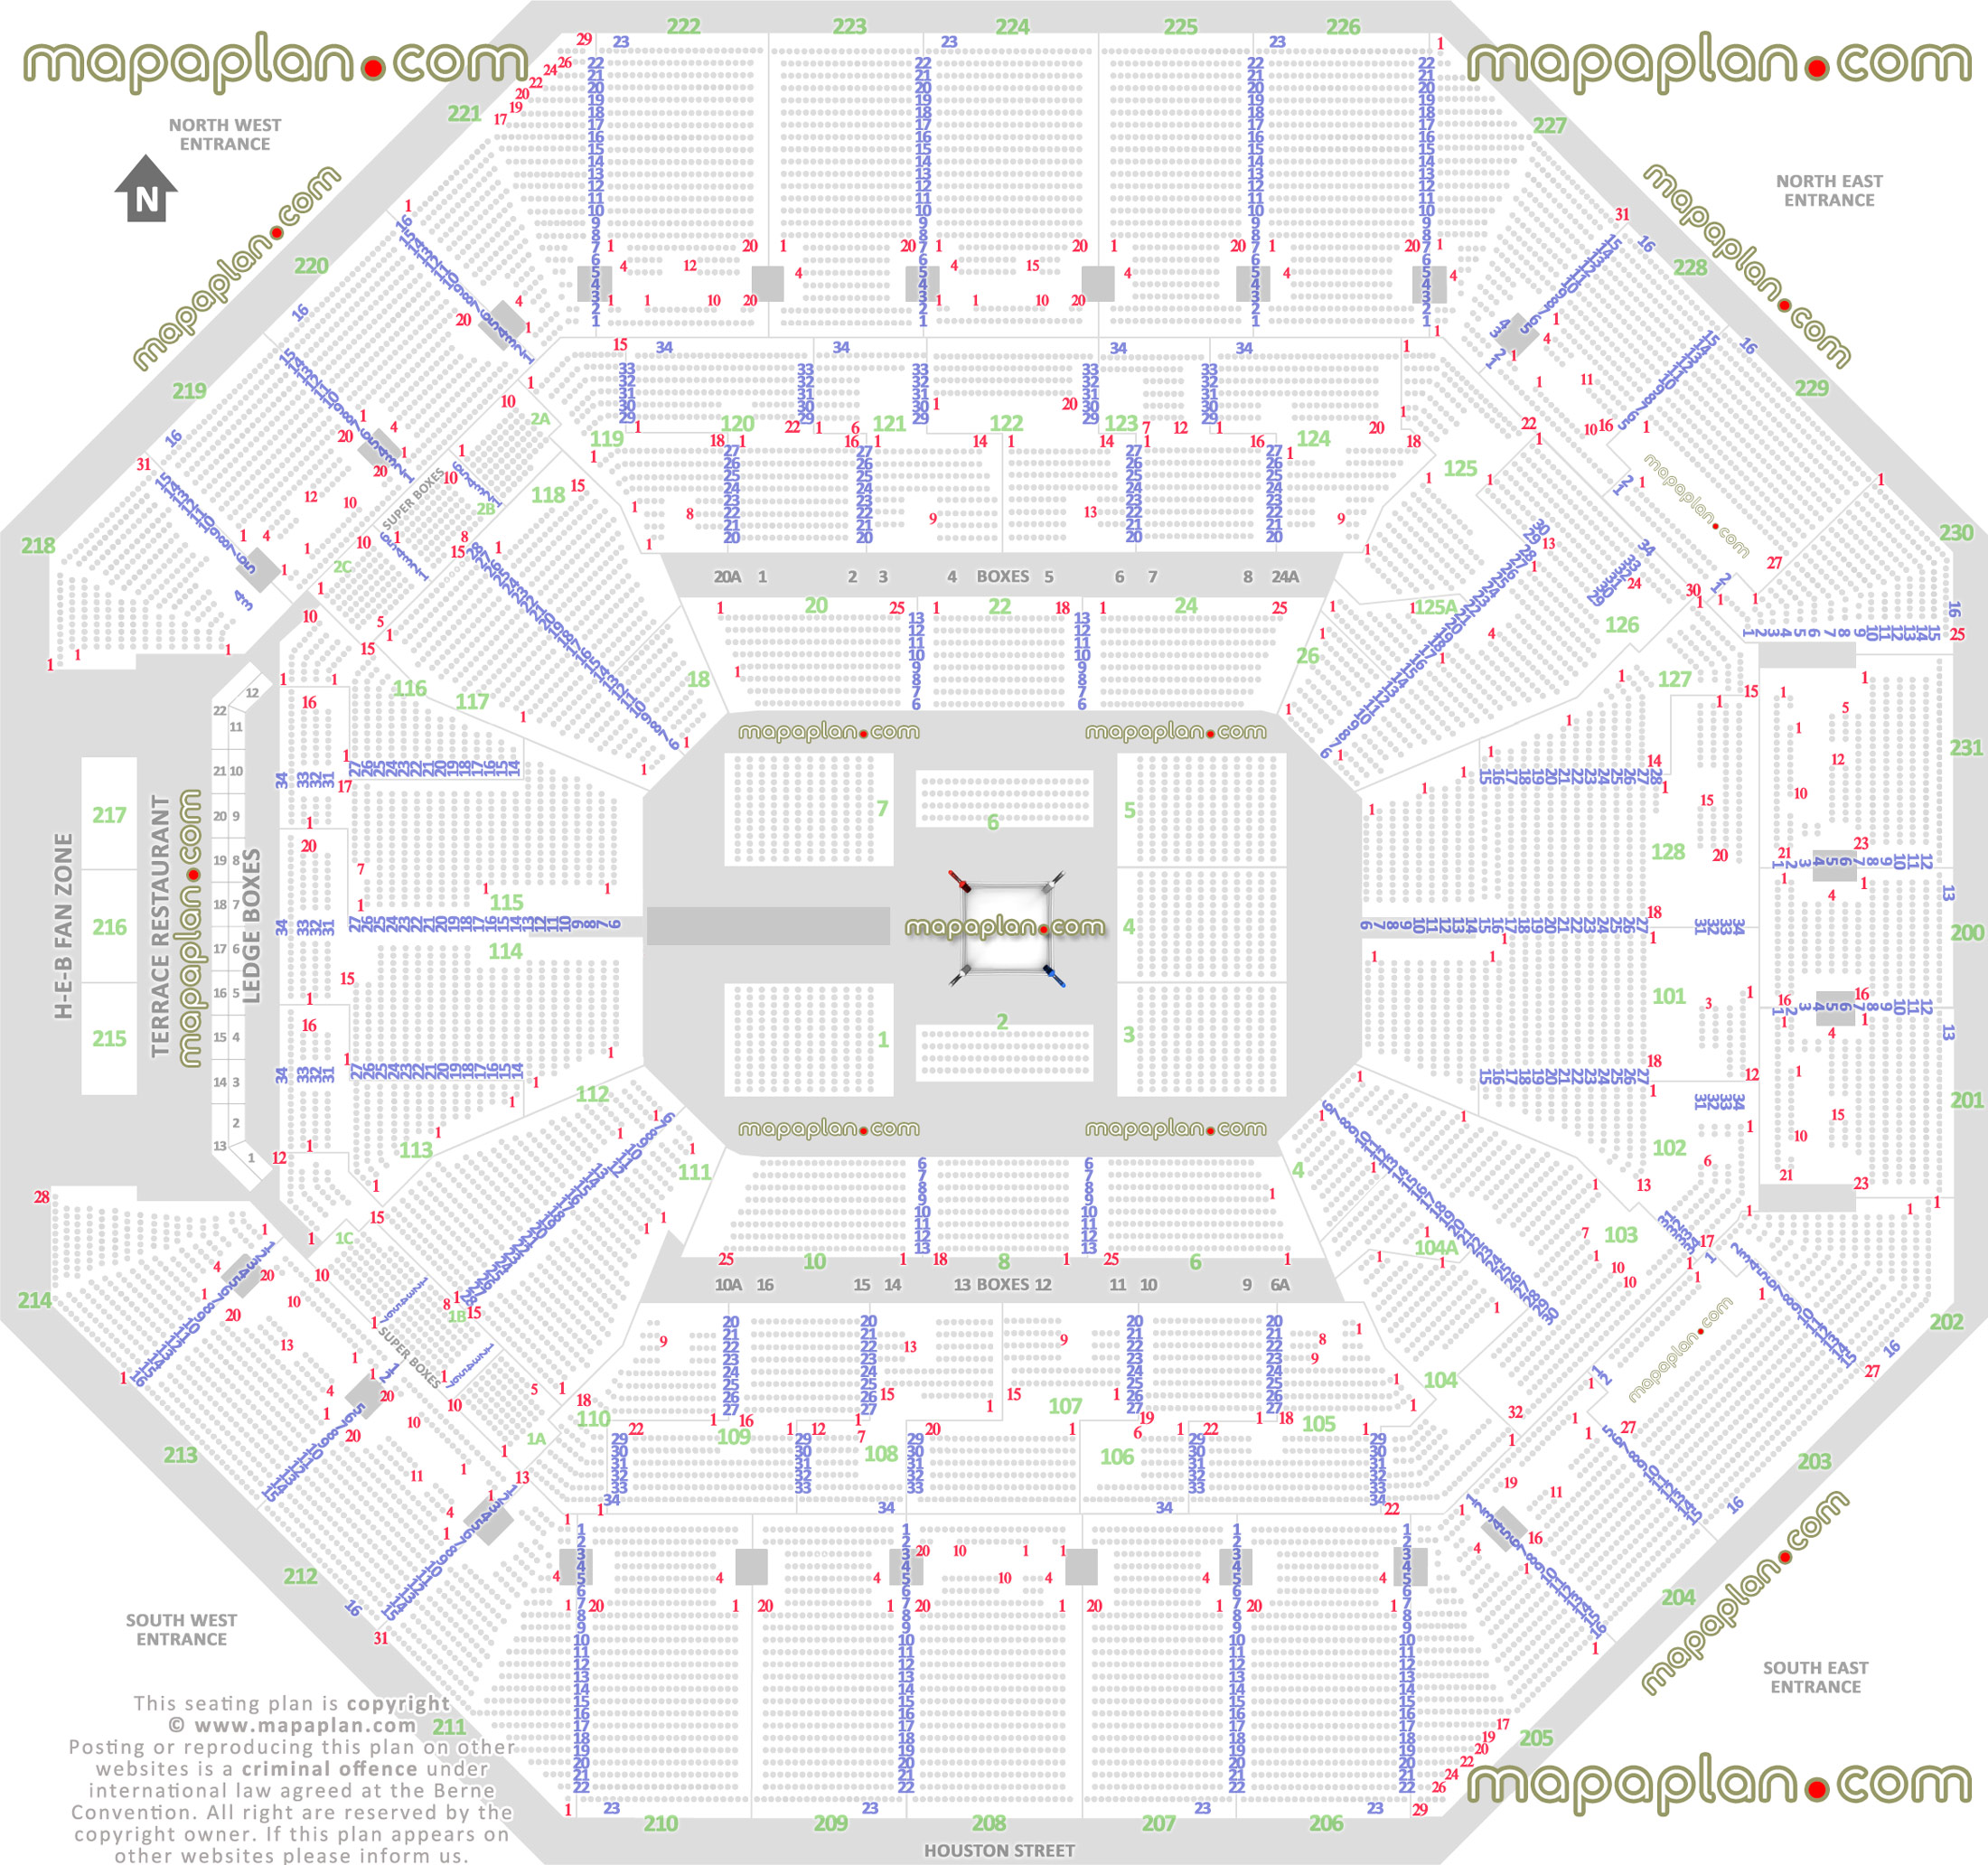 wwe wrestling boxing match events map row 360 round ring floor configuration how rows sections 101 102 103 104 104a 105 106 107 108 109 110 111 112 113 114 115 116 117 118 119 120 121 122 123 124 125 125a 126 127 128 San Antonio Frost Bank Center seating chart